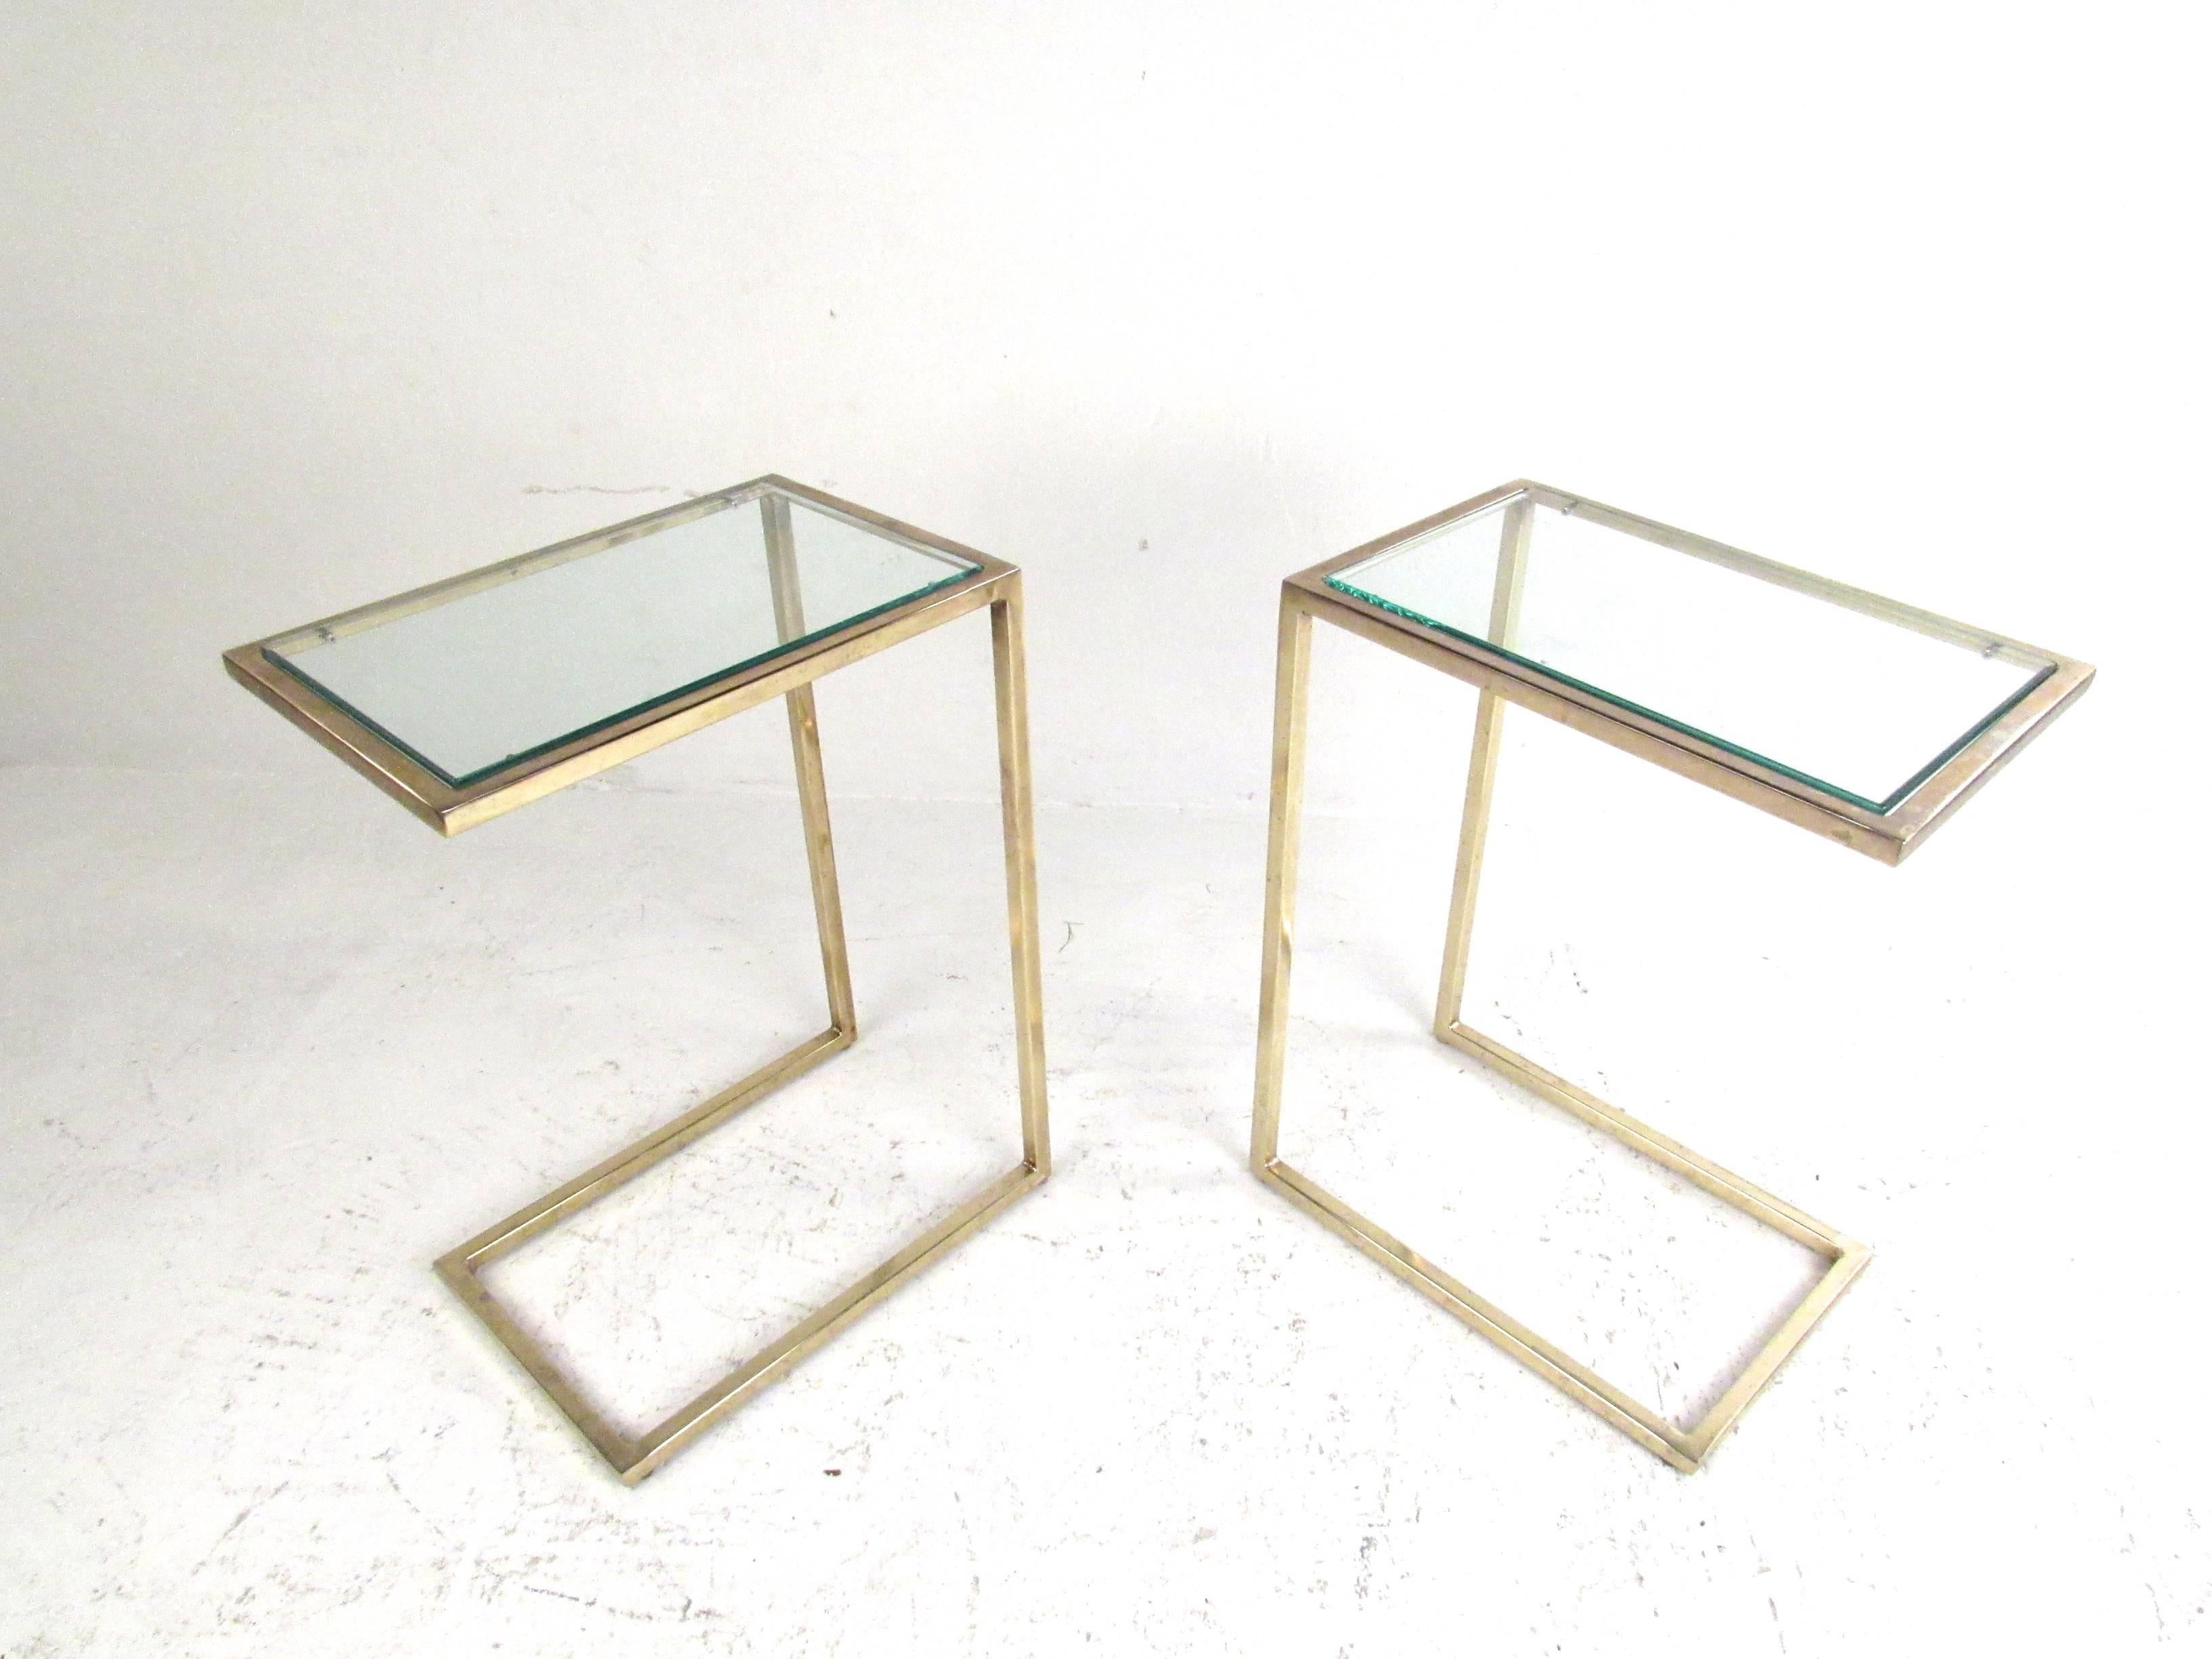 This stunning pair of Mid-Century end tables features a unique narrow size with elegant design. Heavy vintage brass pairs wonderfully with raised glass tops, while the unique shape of the piece provide simple yet stylish tables for a variety of